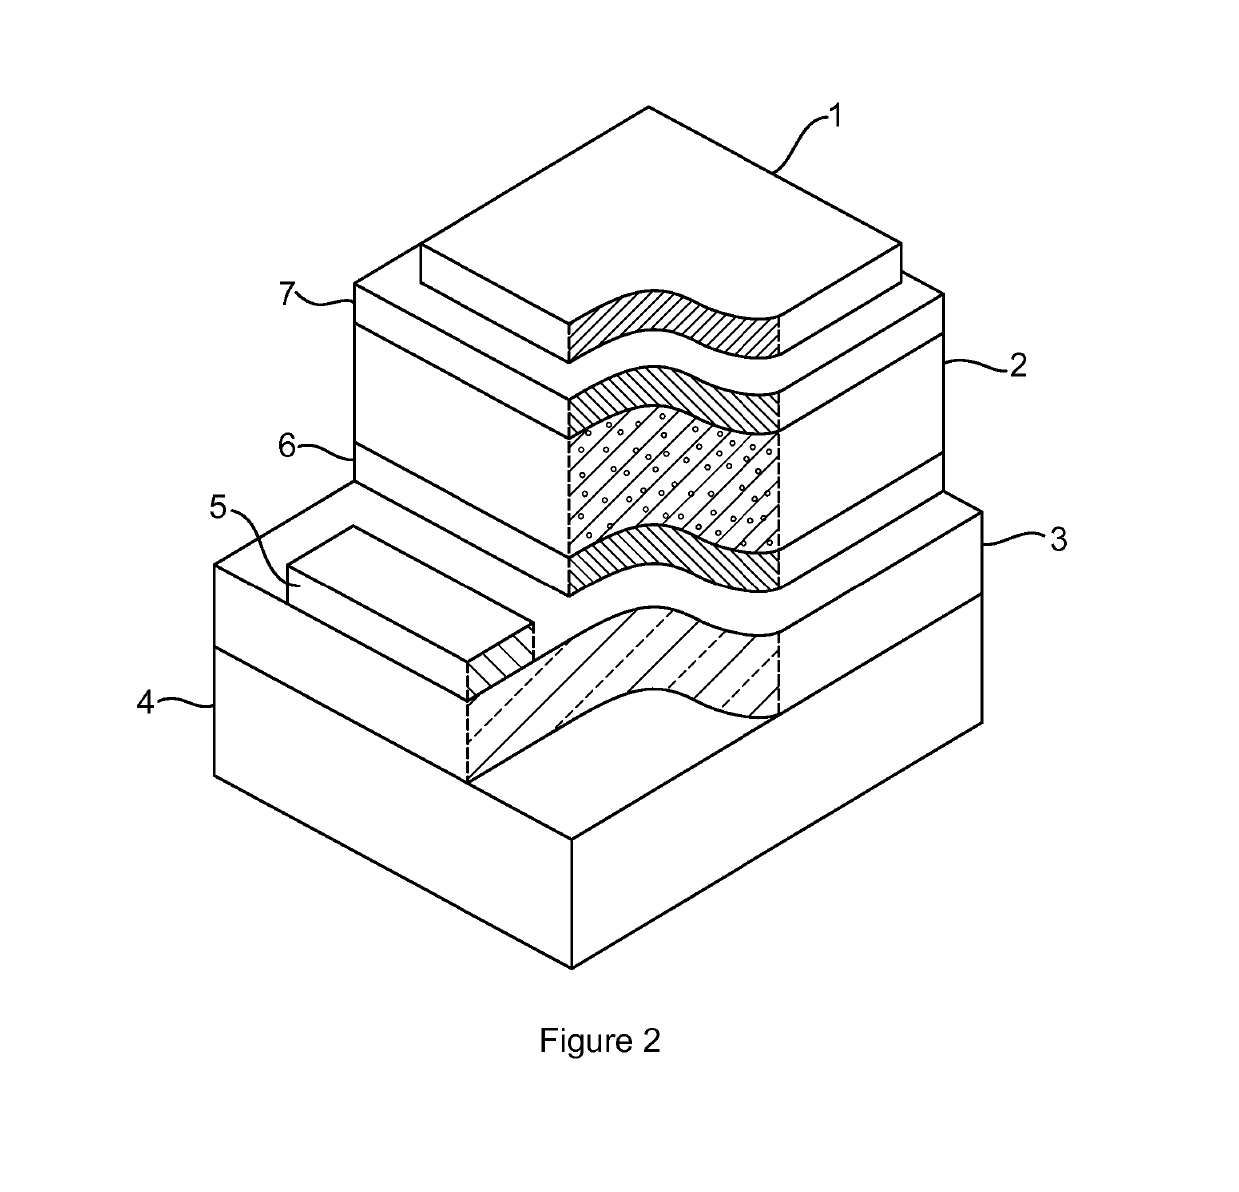 Optoelectronic device comprising porous scaffold material and perovskites